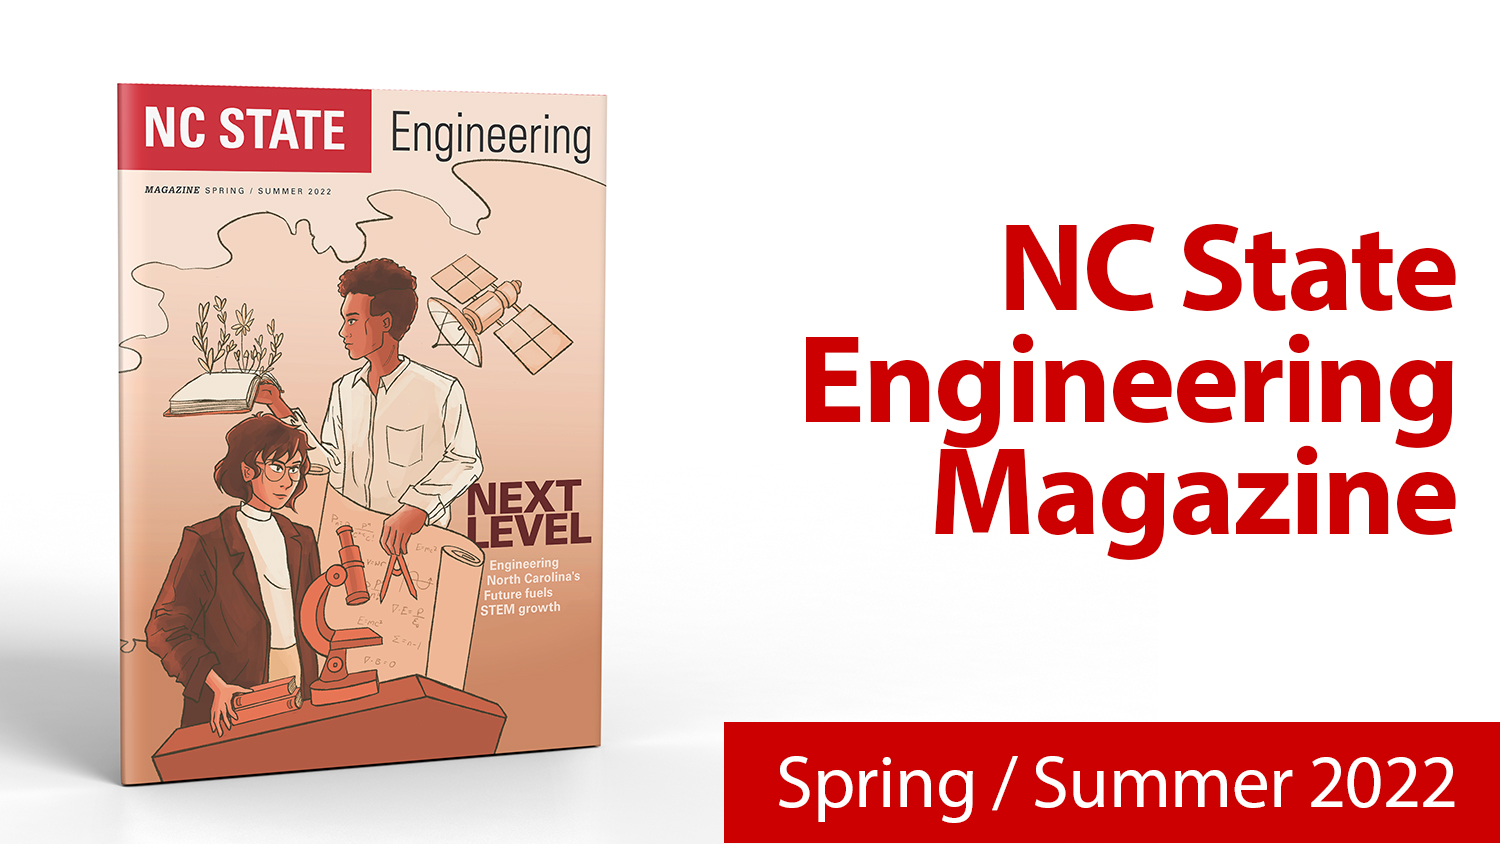 Spring Summer 2022 NC State Engineering Magazine featured image. Includes a mockup of the front cover.